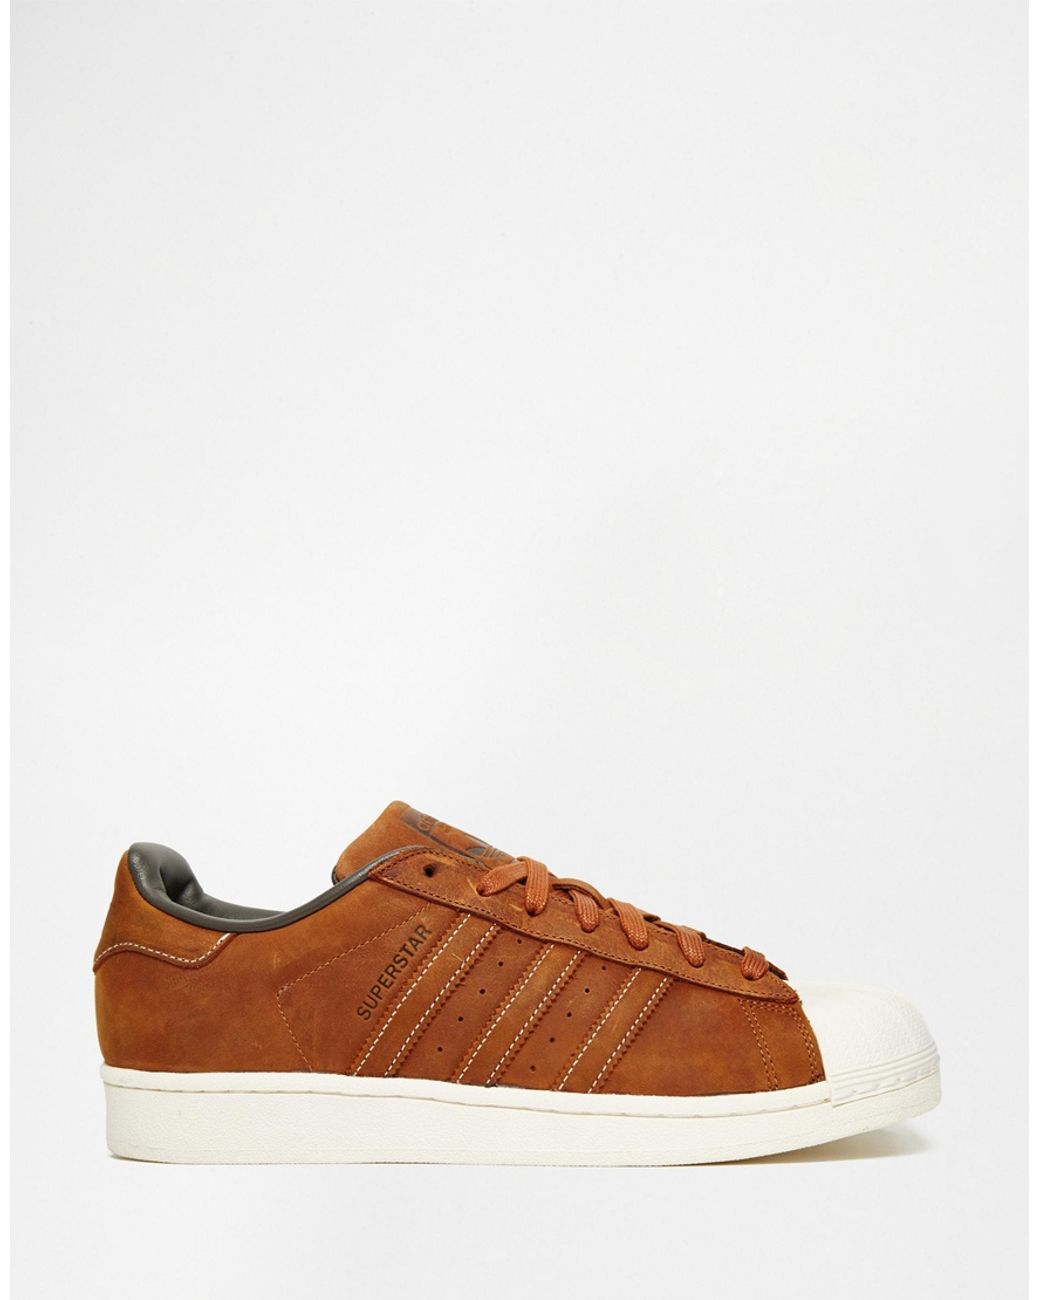 adidas Originals Superstar Waxed Leather Trainers S79471 in Men Lyst